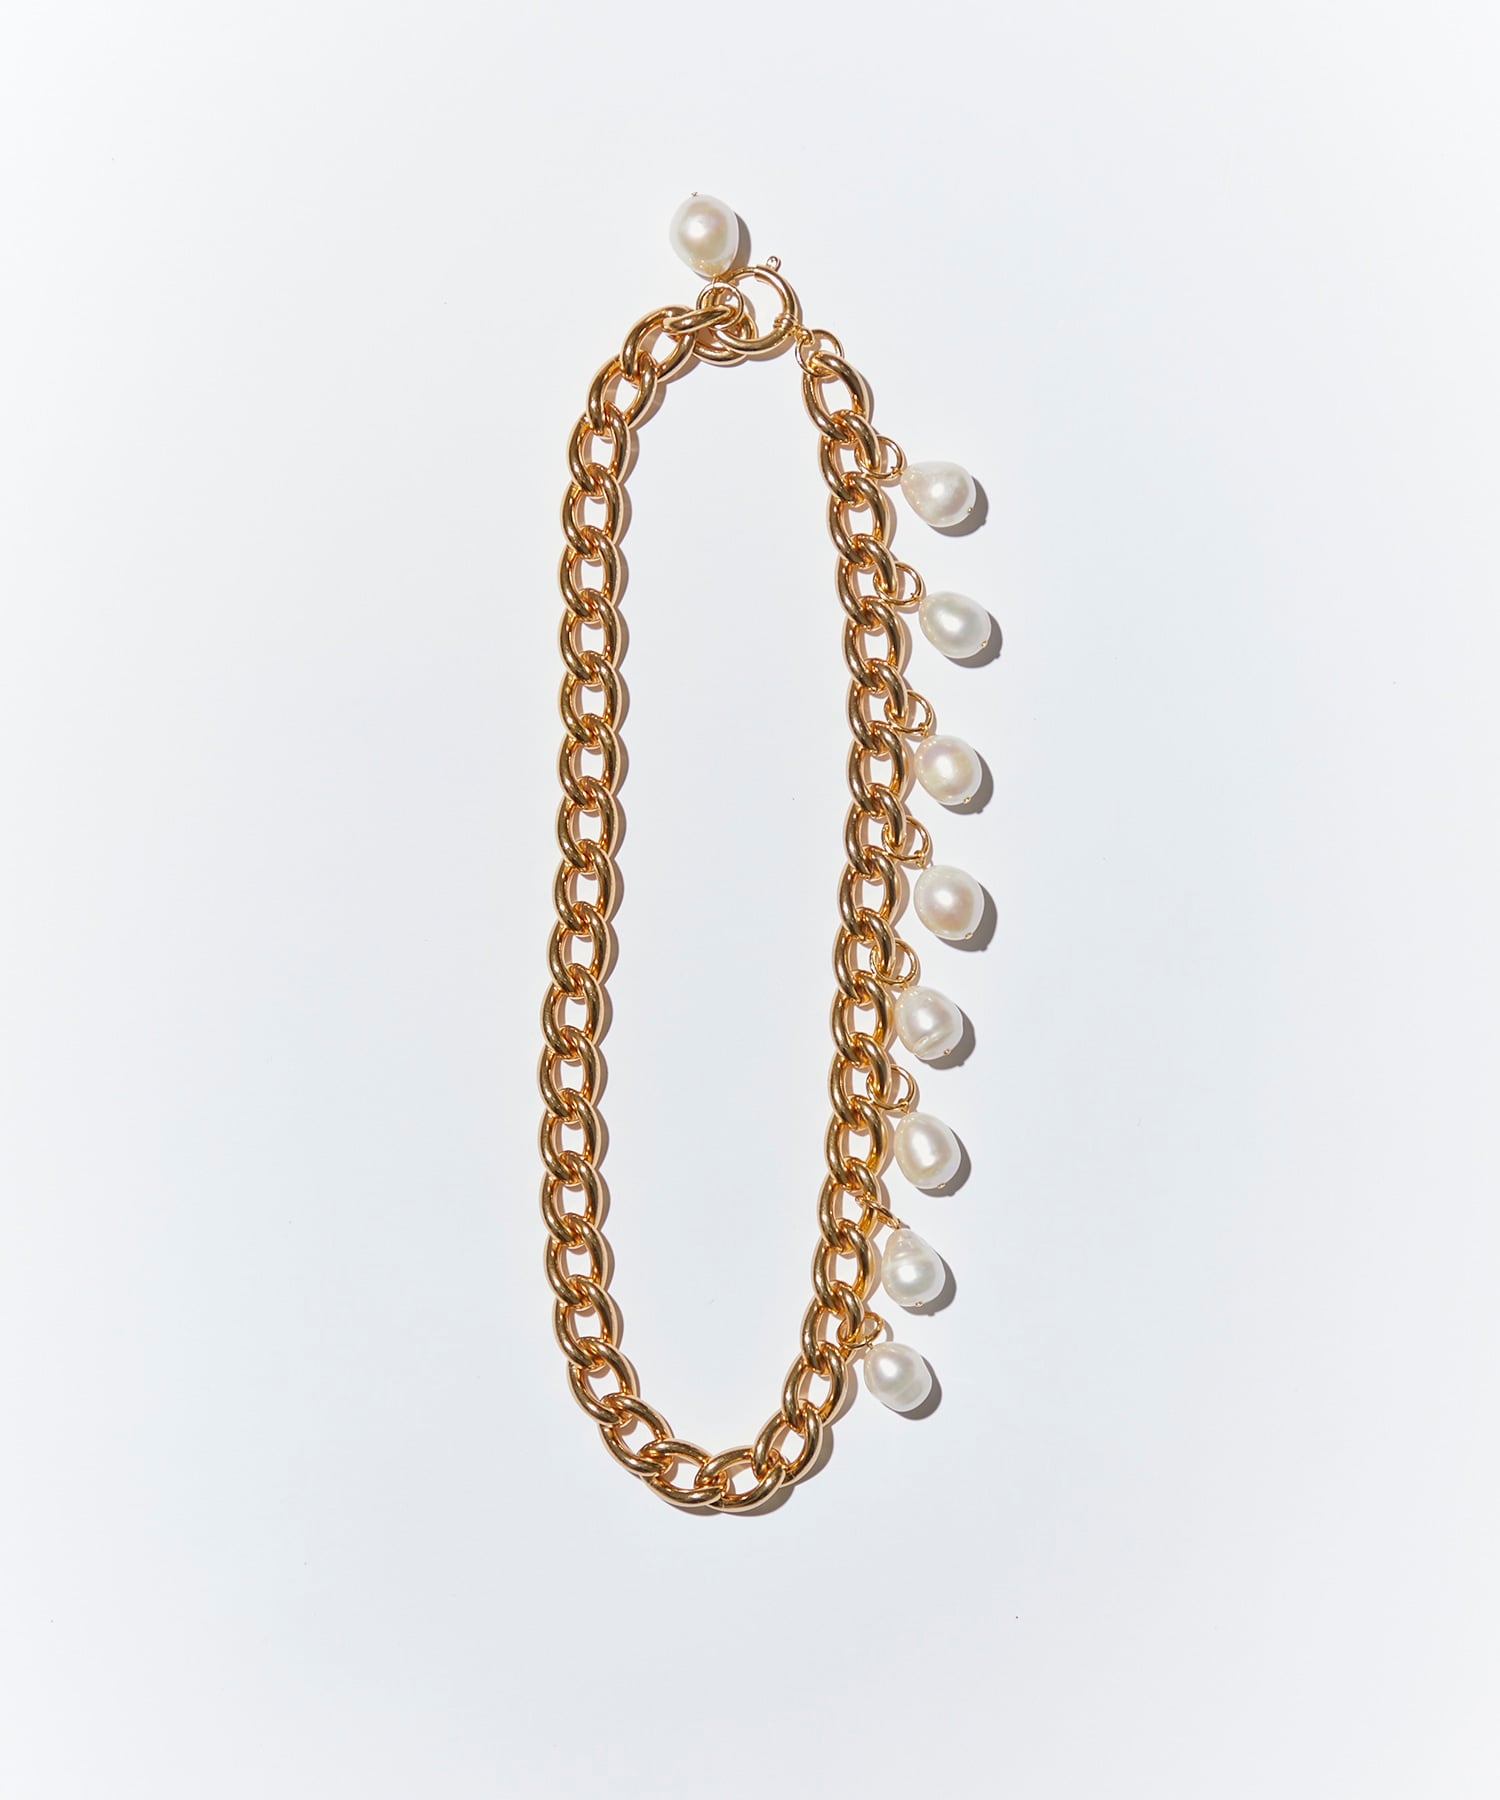 Baroque Pearl Necklace STUDIOUS